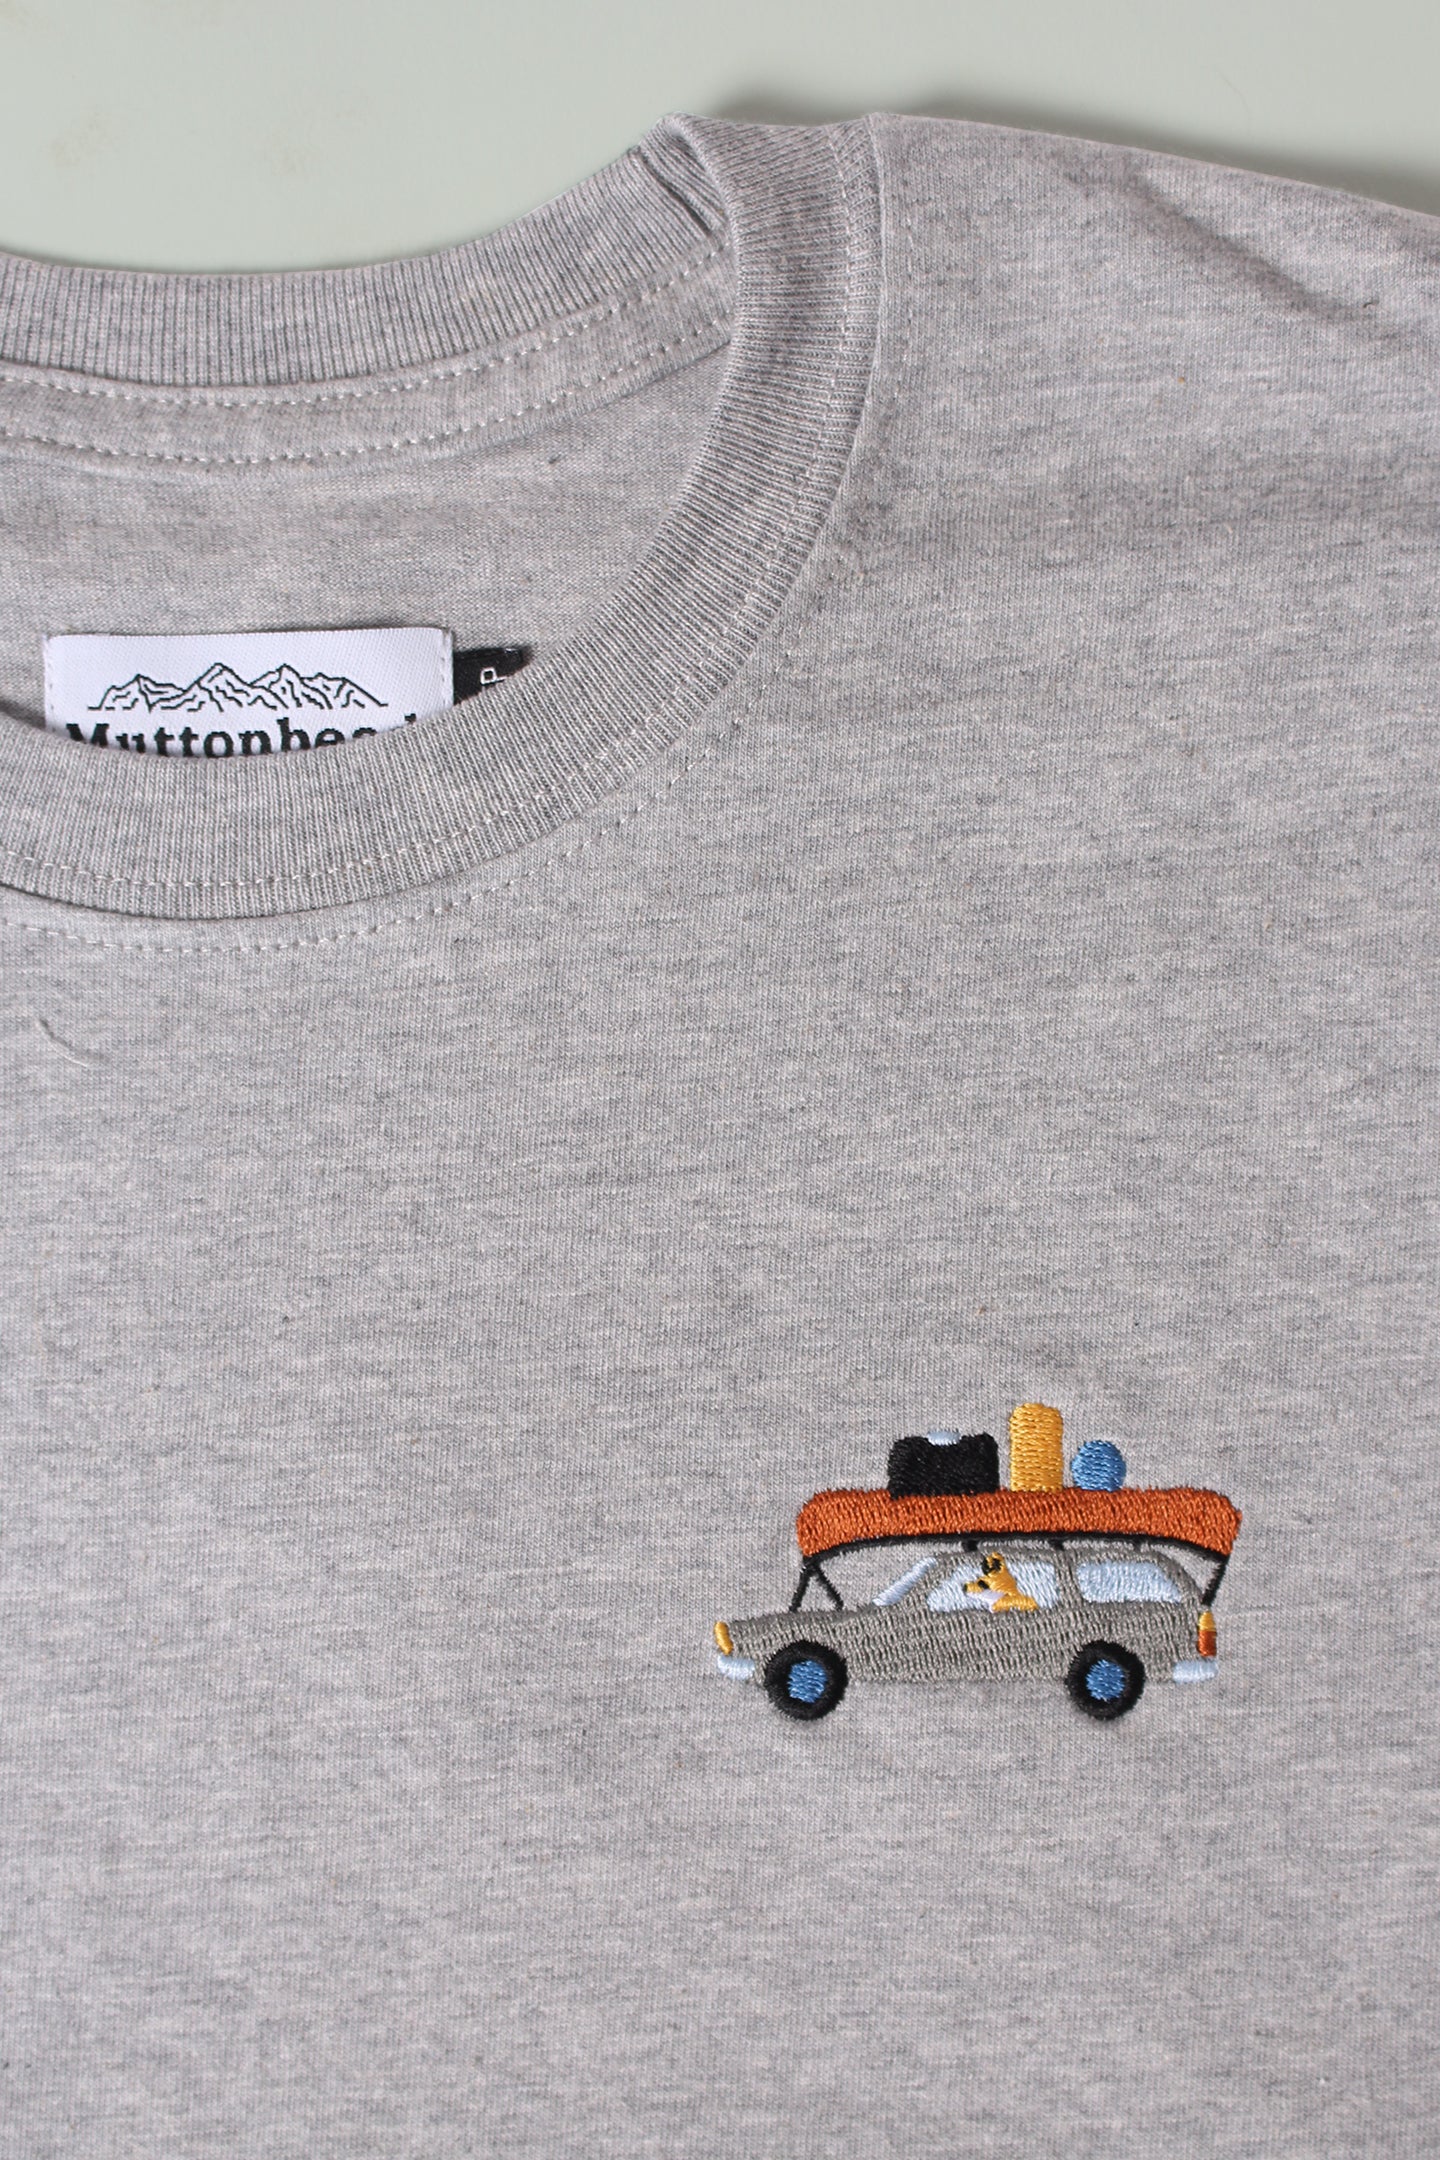 Medium Weight Tee - Heather Grey - Road Trip Embroidery - CAMP series